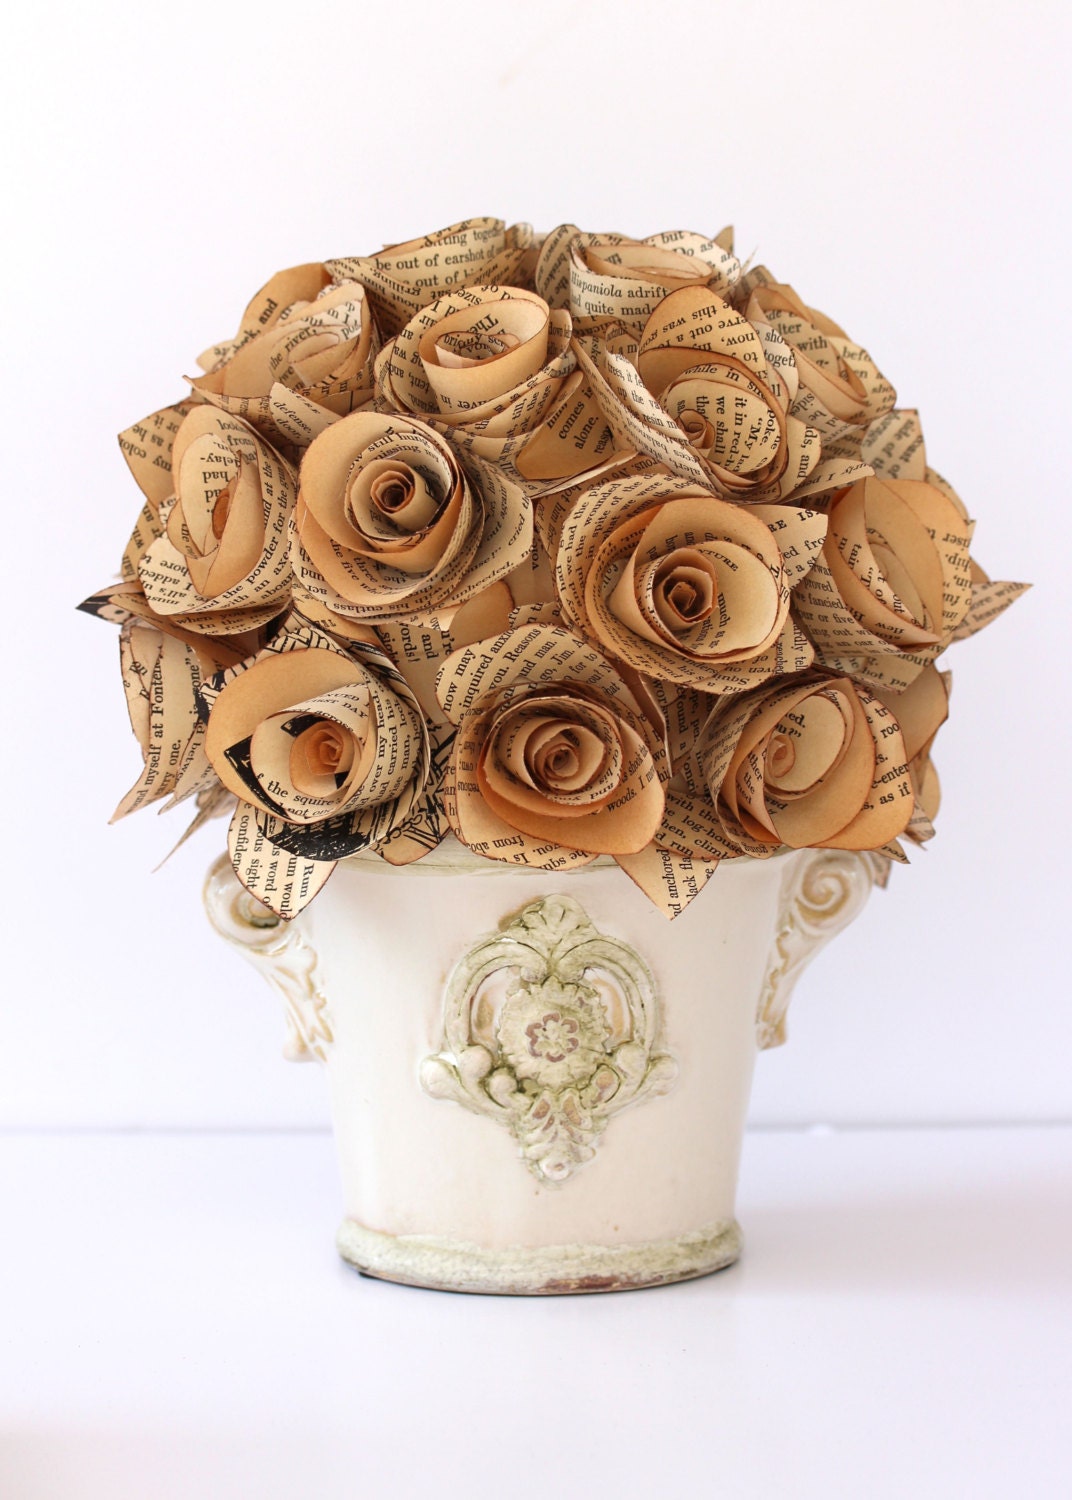 VINTAGE BOOK ROSES Centerpiece /// Treasure Island /// Made To Order